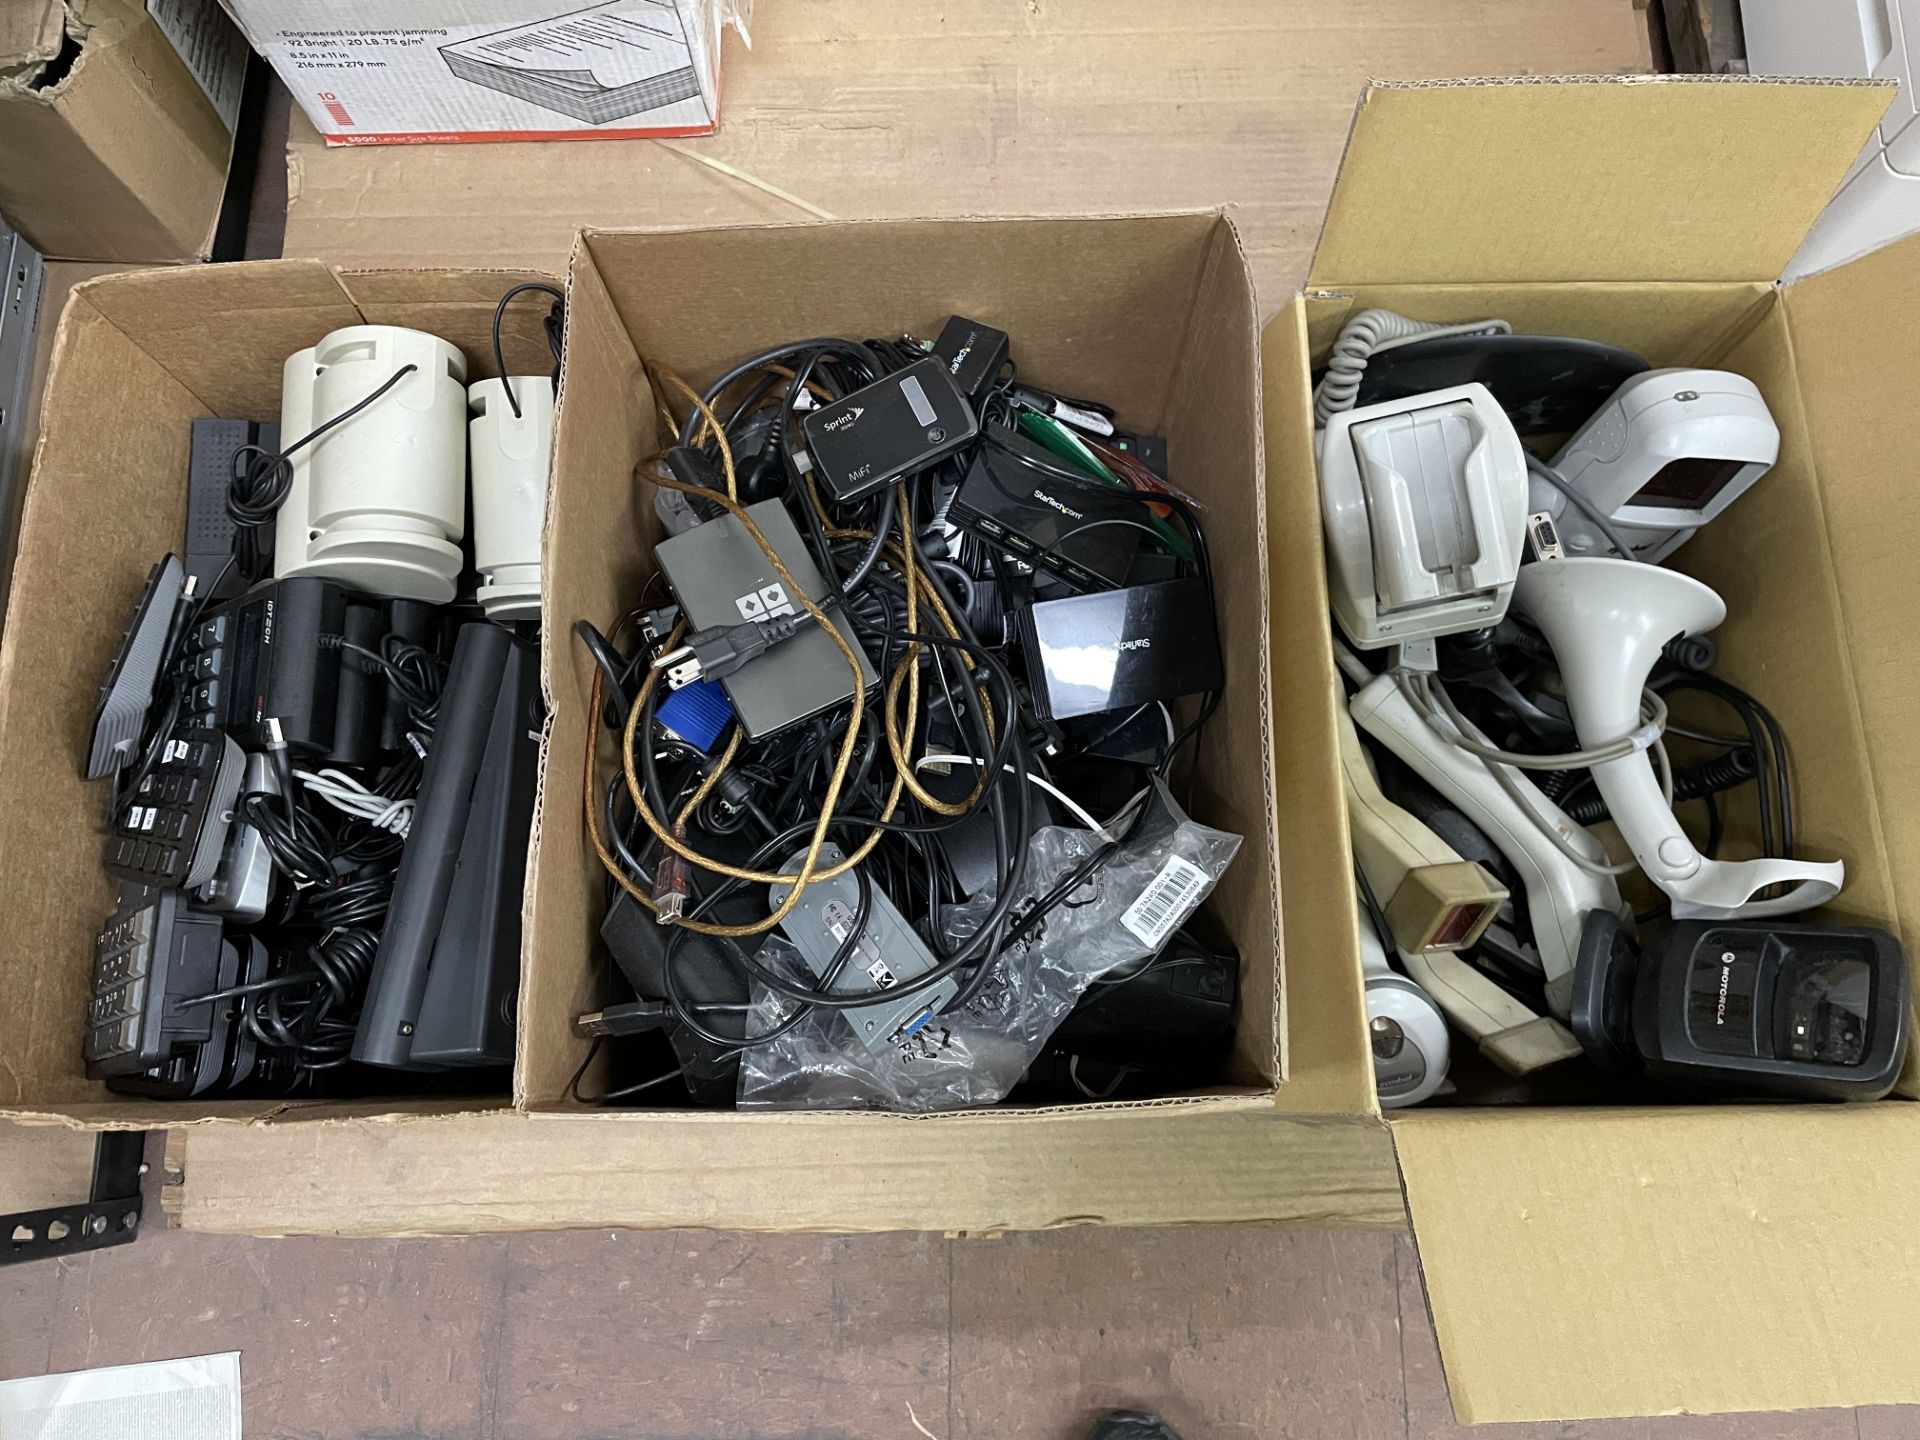 Mixed unsorted electronics, including POS scanners, networking items, cables etc.